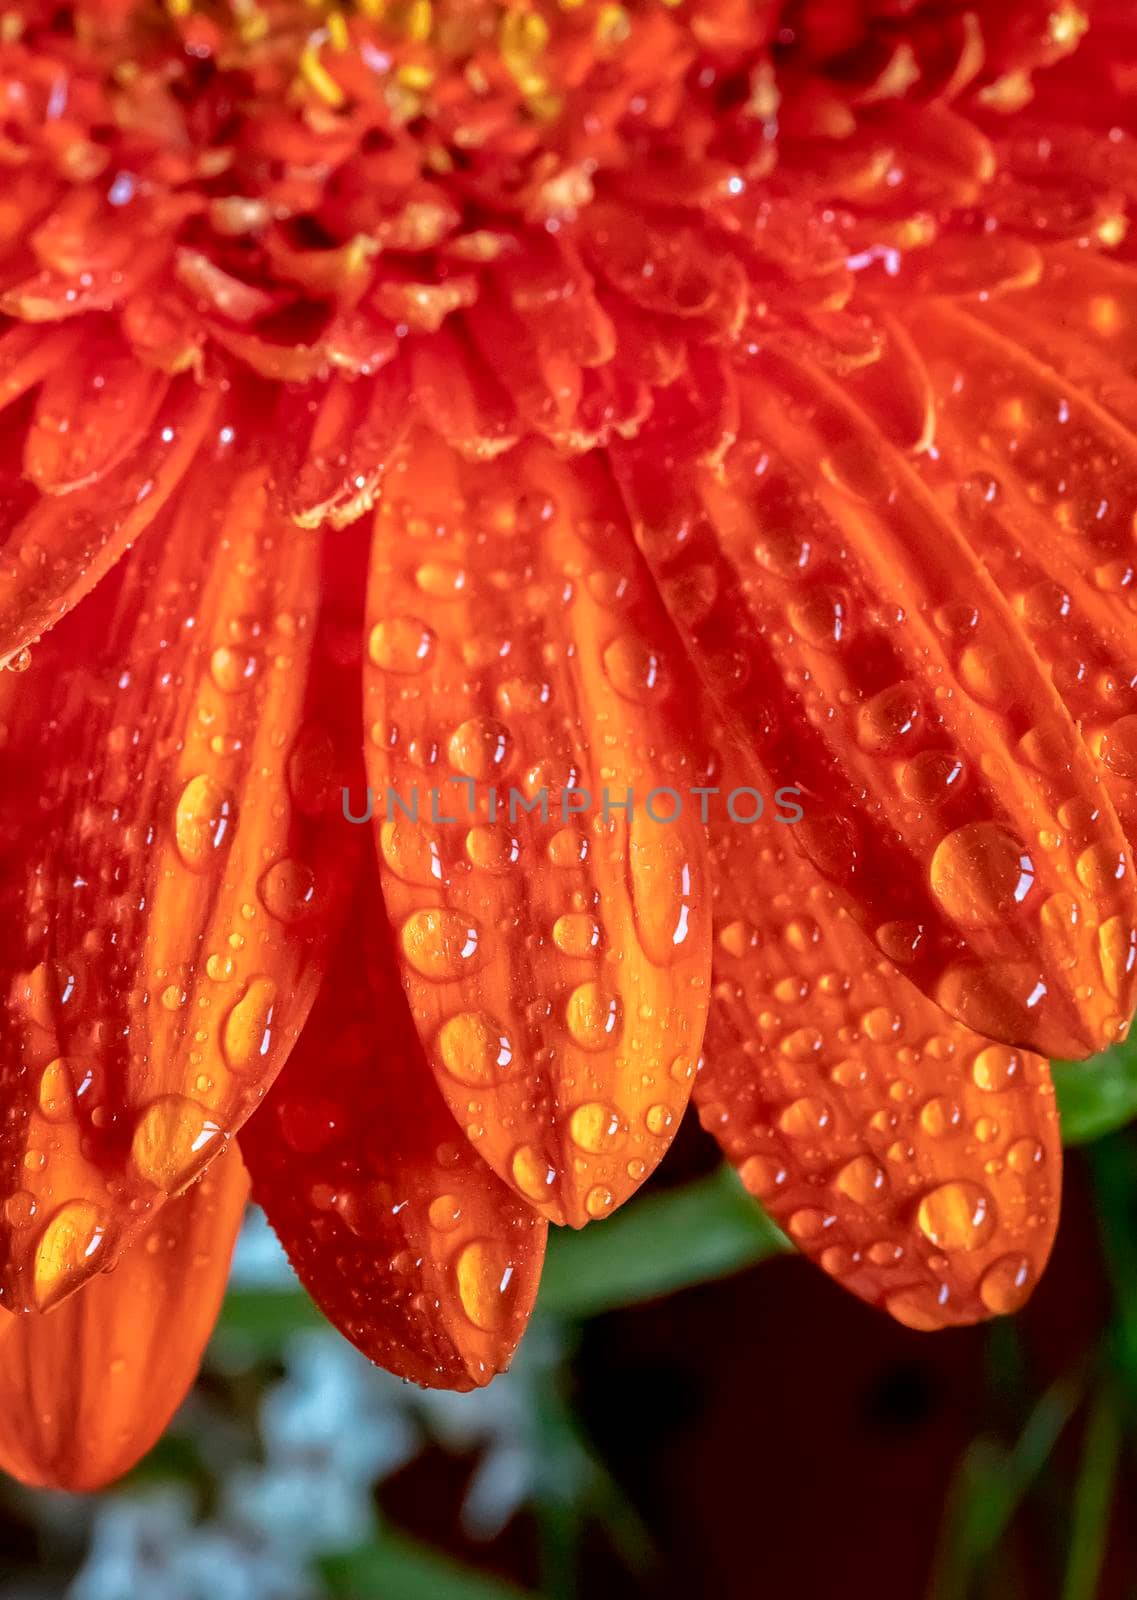 A close view of a beautiful red gerbera flower with water drops. Vertical view